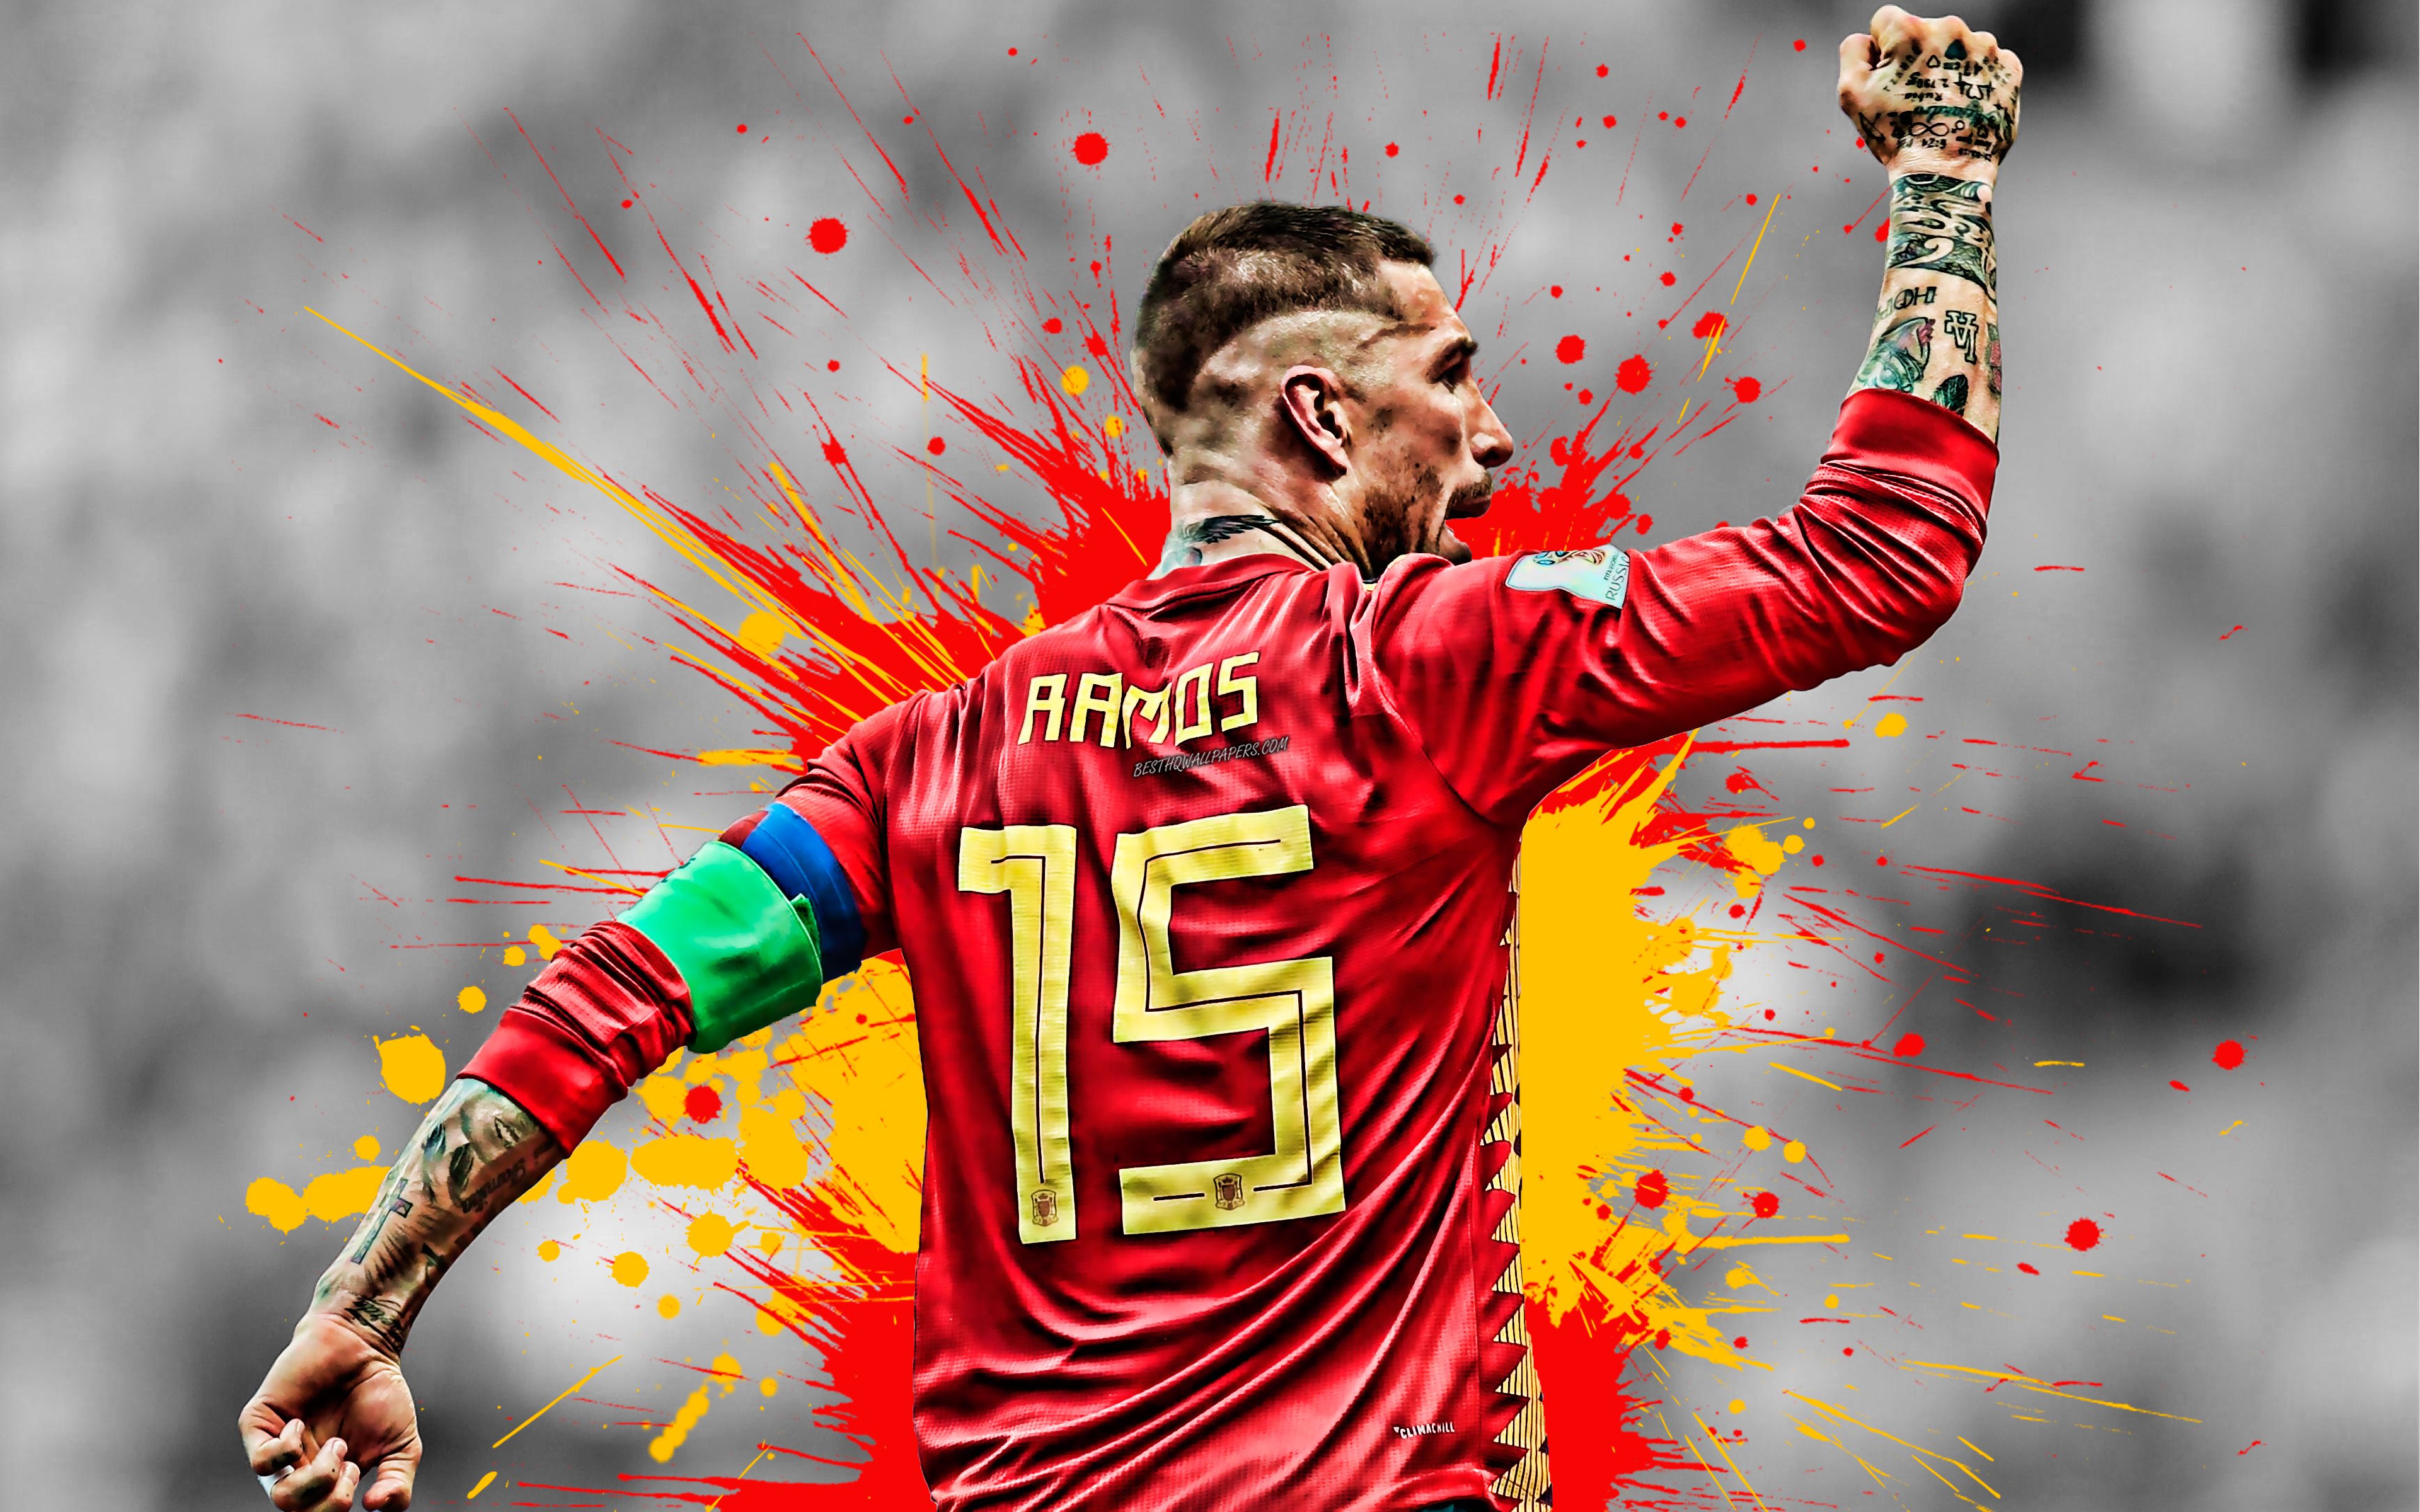 Download wallpaper Sergio Ramos, Spain national football team, defender, Spanish football player, creative flag of Spain, paint splashes, Spain, football for desktop with resolution 3840x2400. High Quality HD picture wallpaper